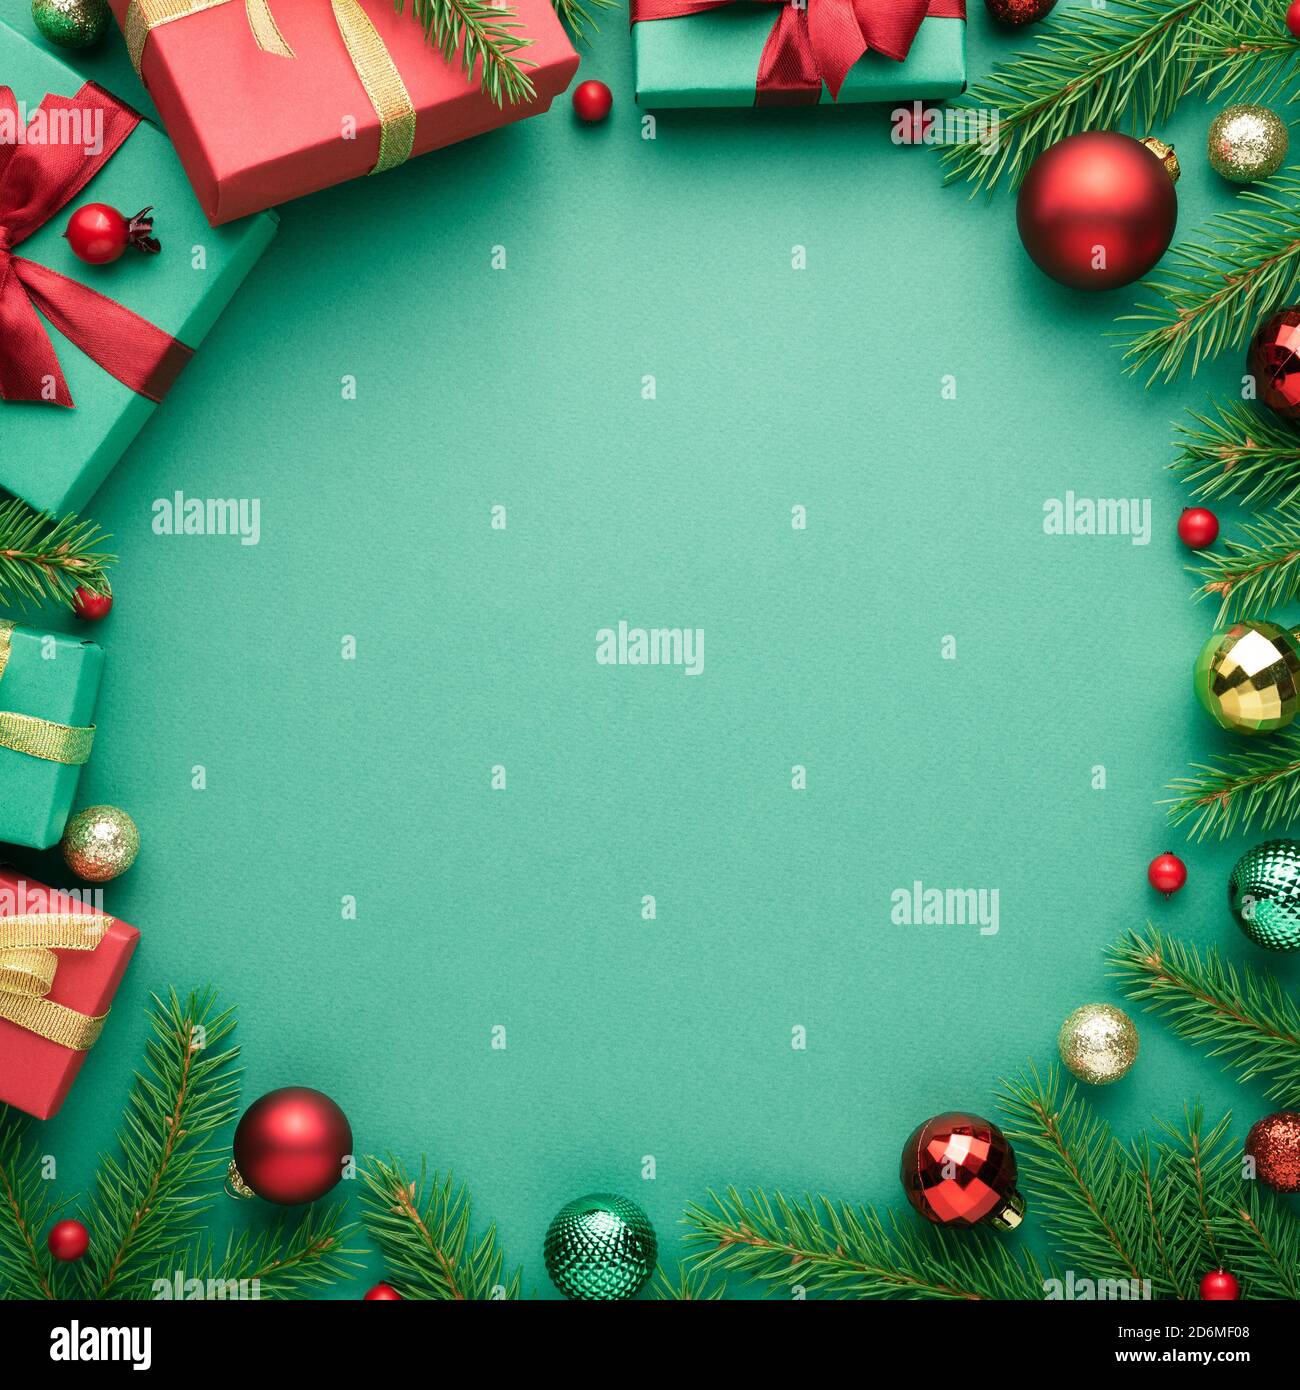 Christmas card with circle frame on turquoise background. Blank with copy space for advertising text. Top view, flat lay Stock Photo